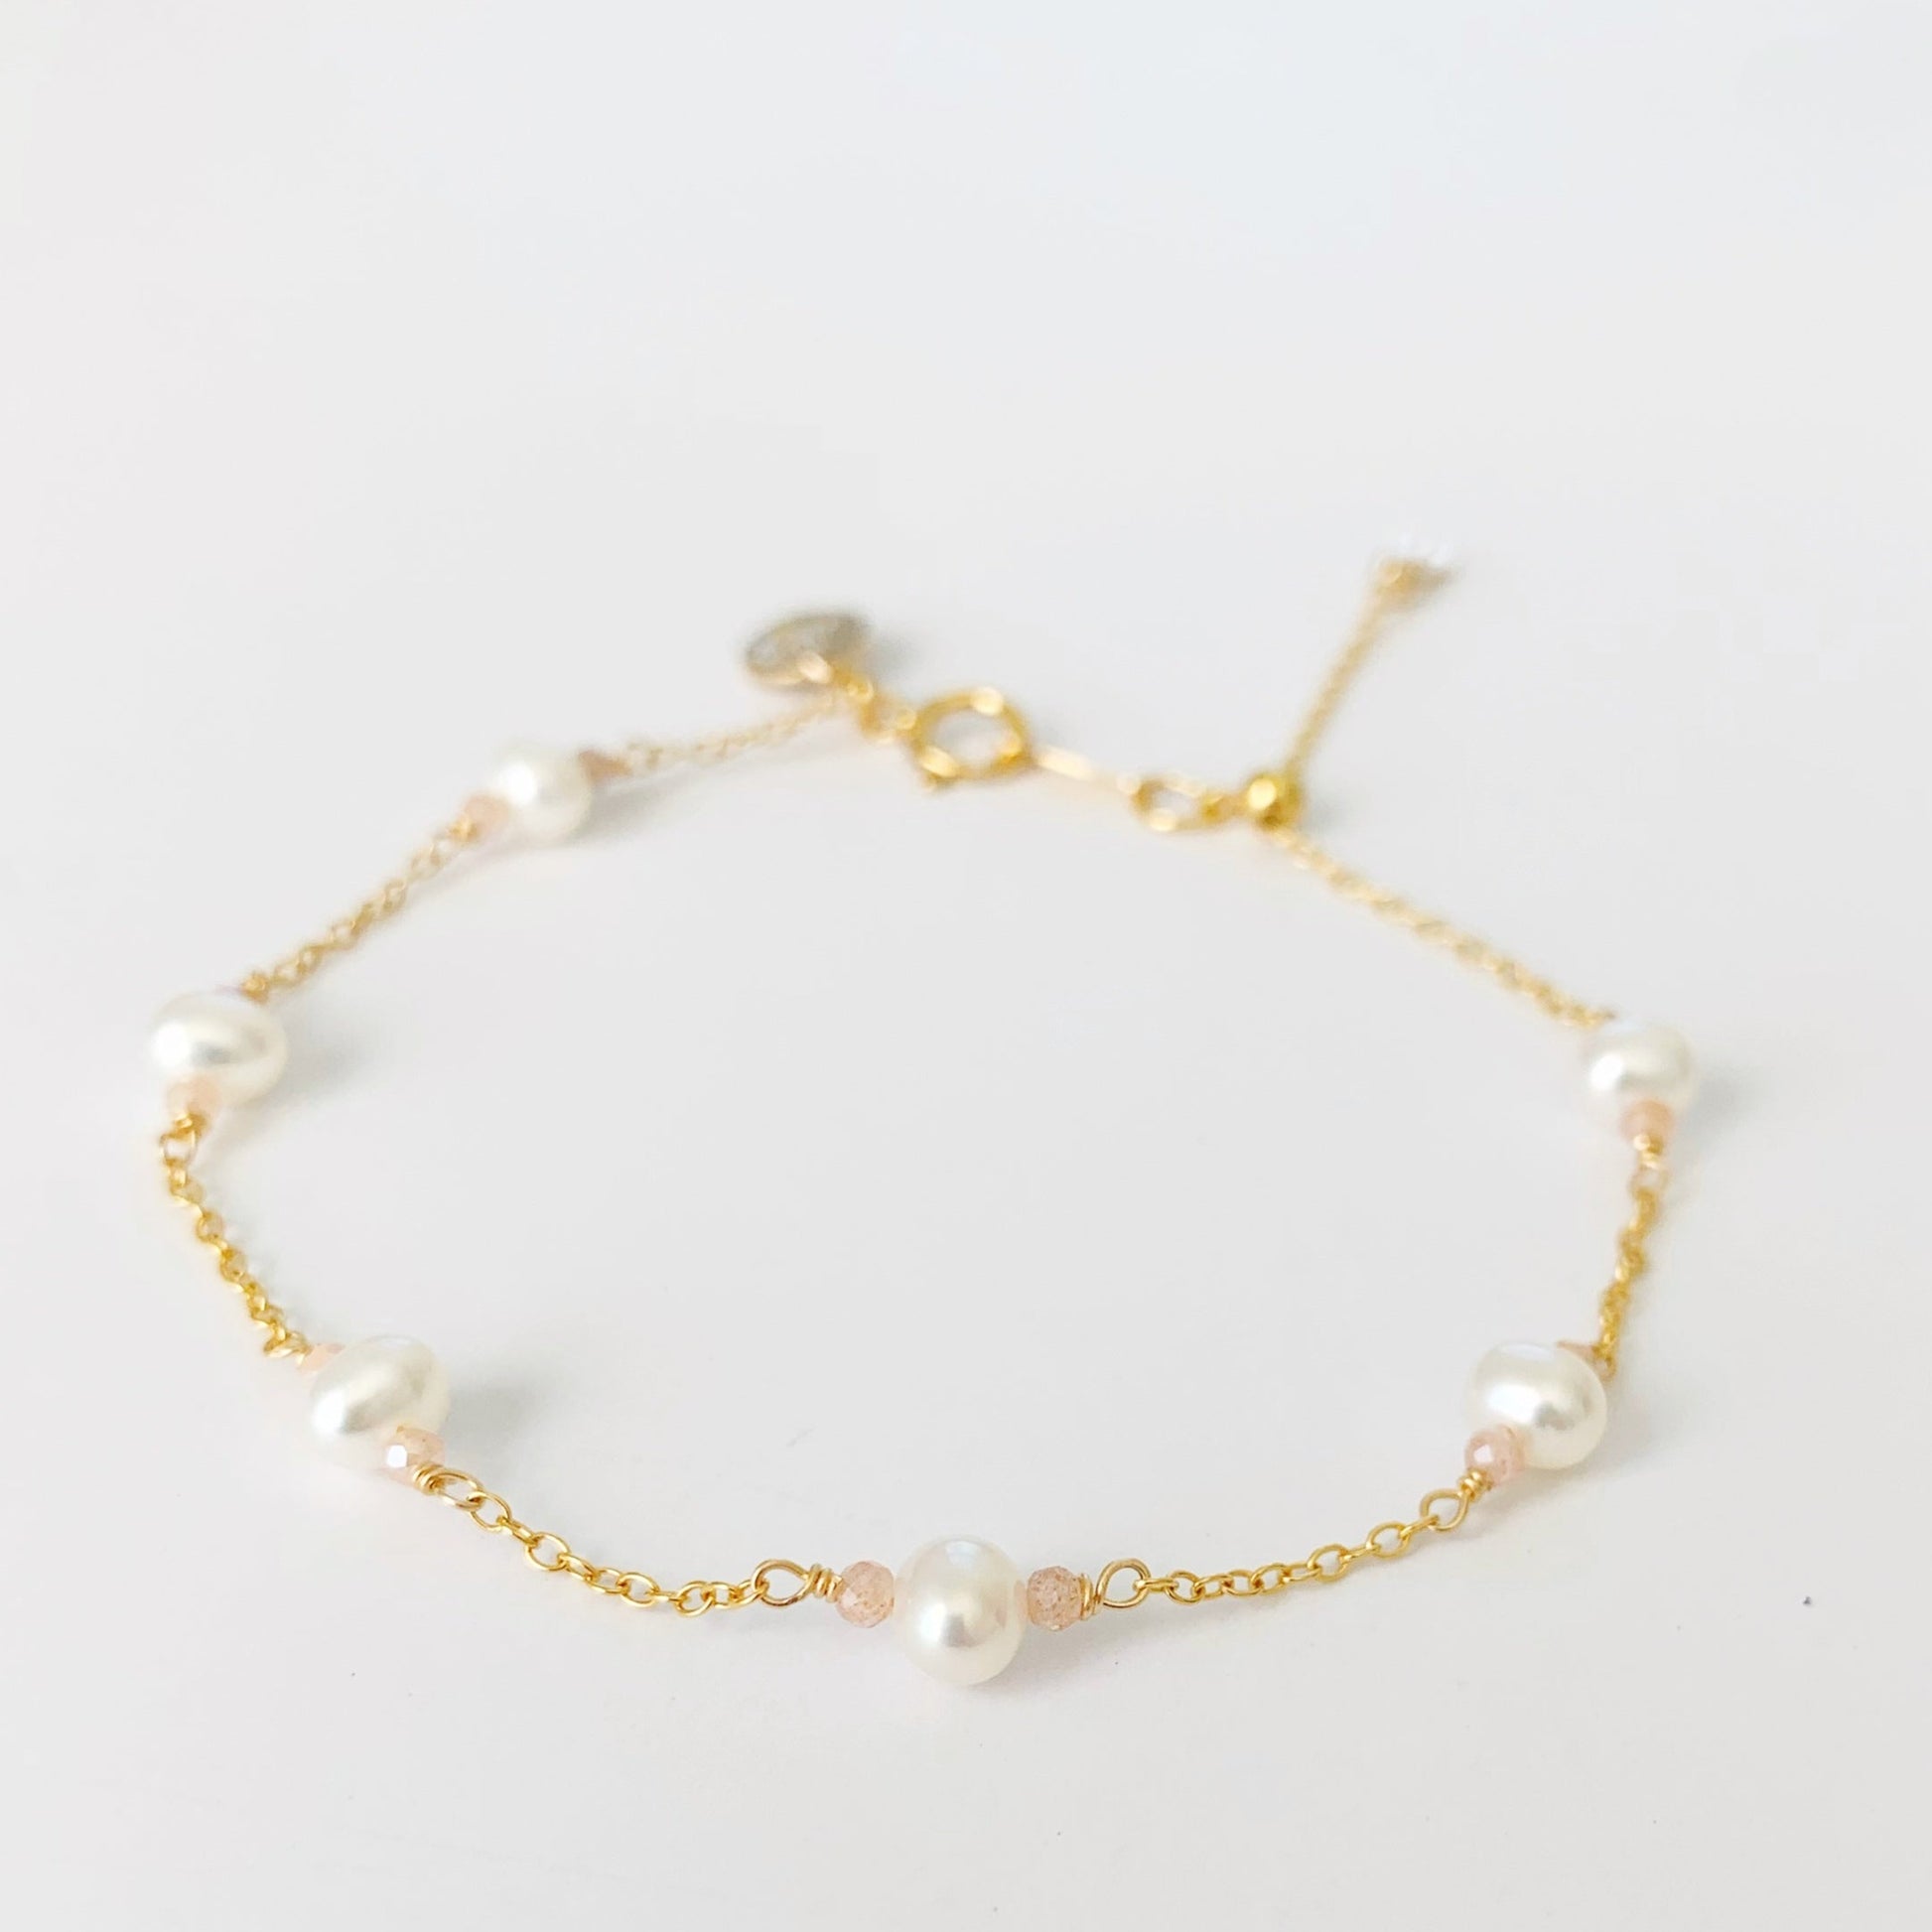 The barrington bracelet by mermaids and madeleines is a station tin-cup style bracelet created with freshwater pearls and peach moonstone beads on 14k gold filled chain, the bracelet has a spring ring clasp and adjustable slide bead closure. this bracelet is photographed on a white background